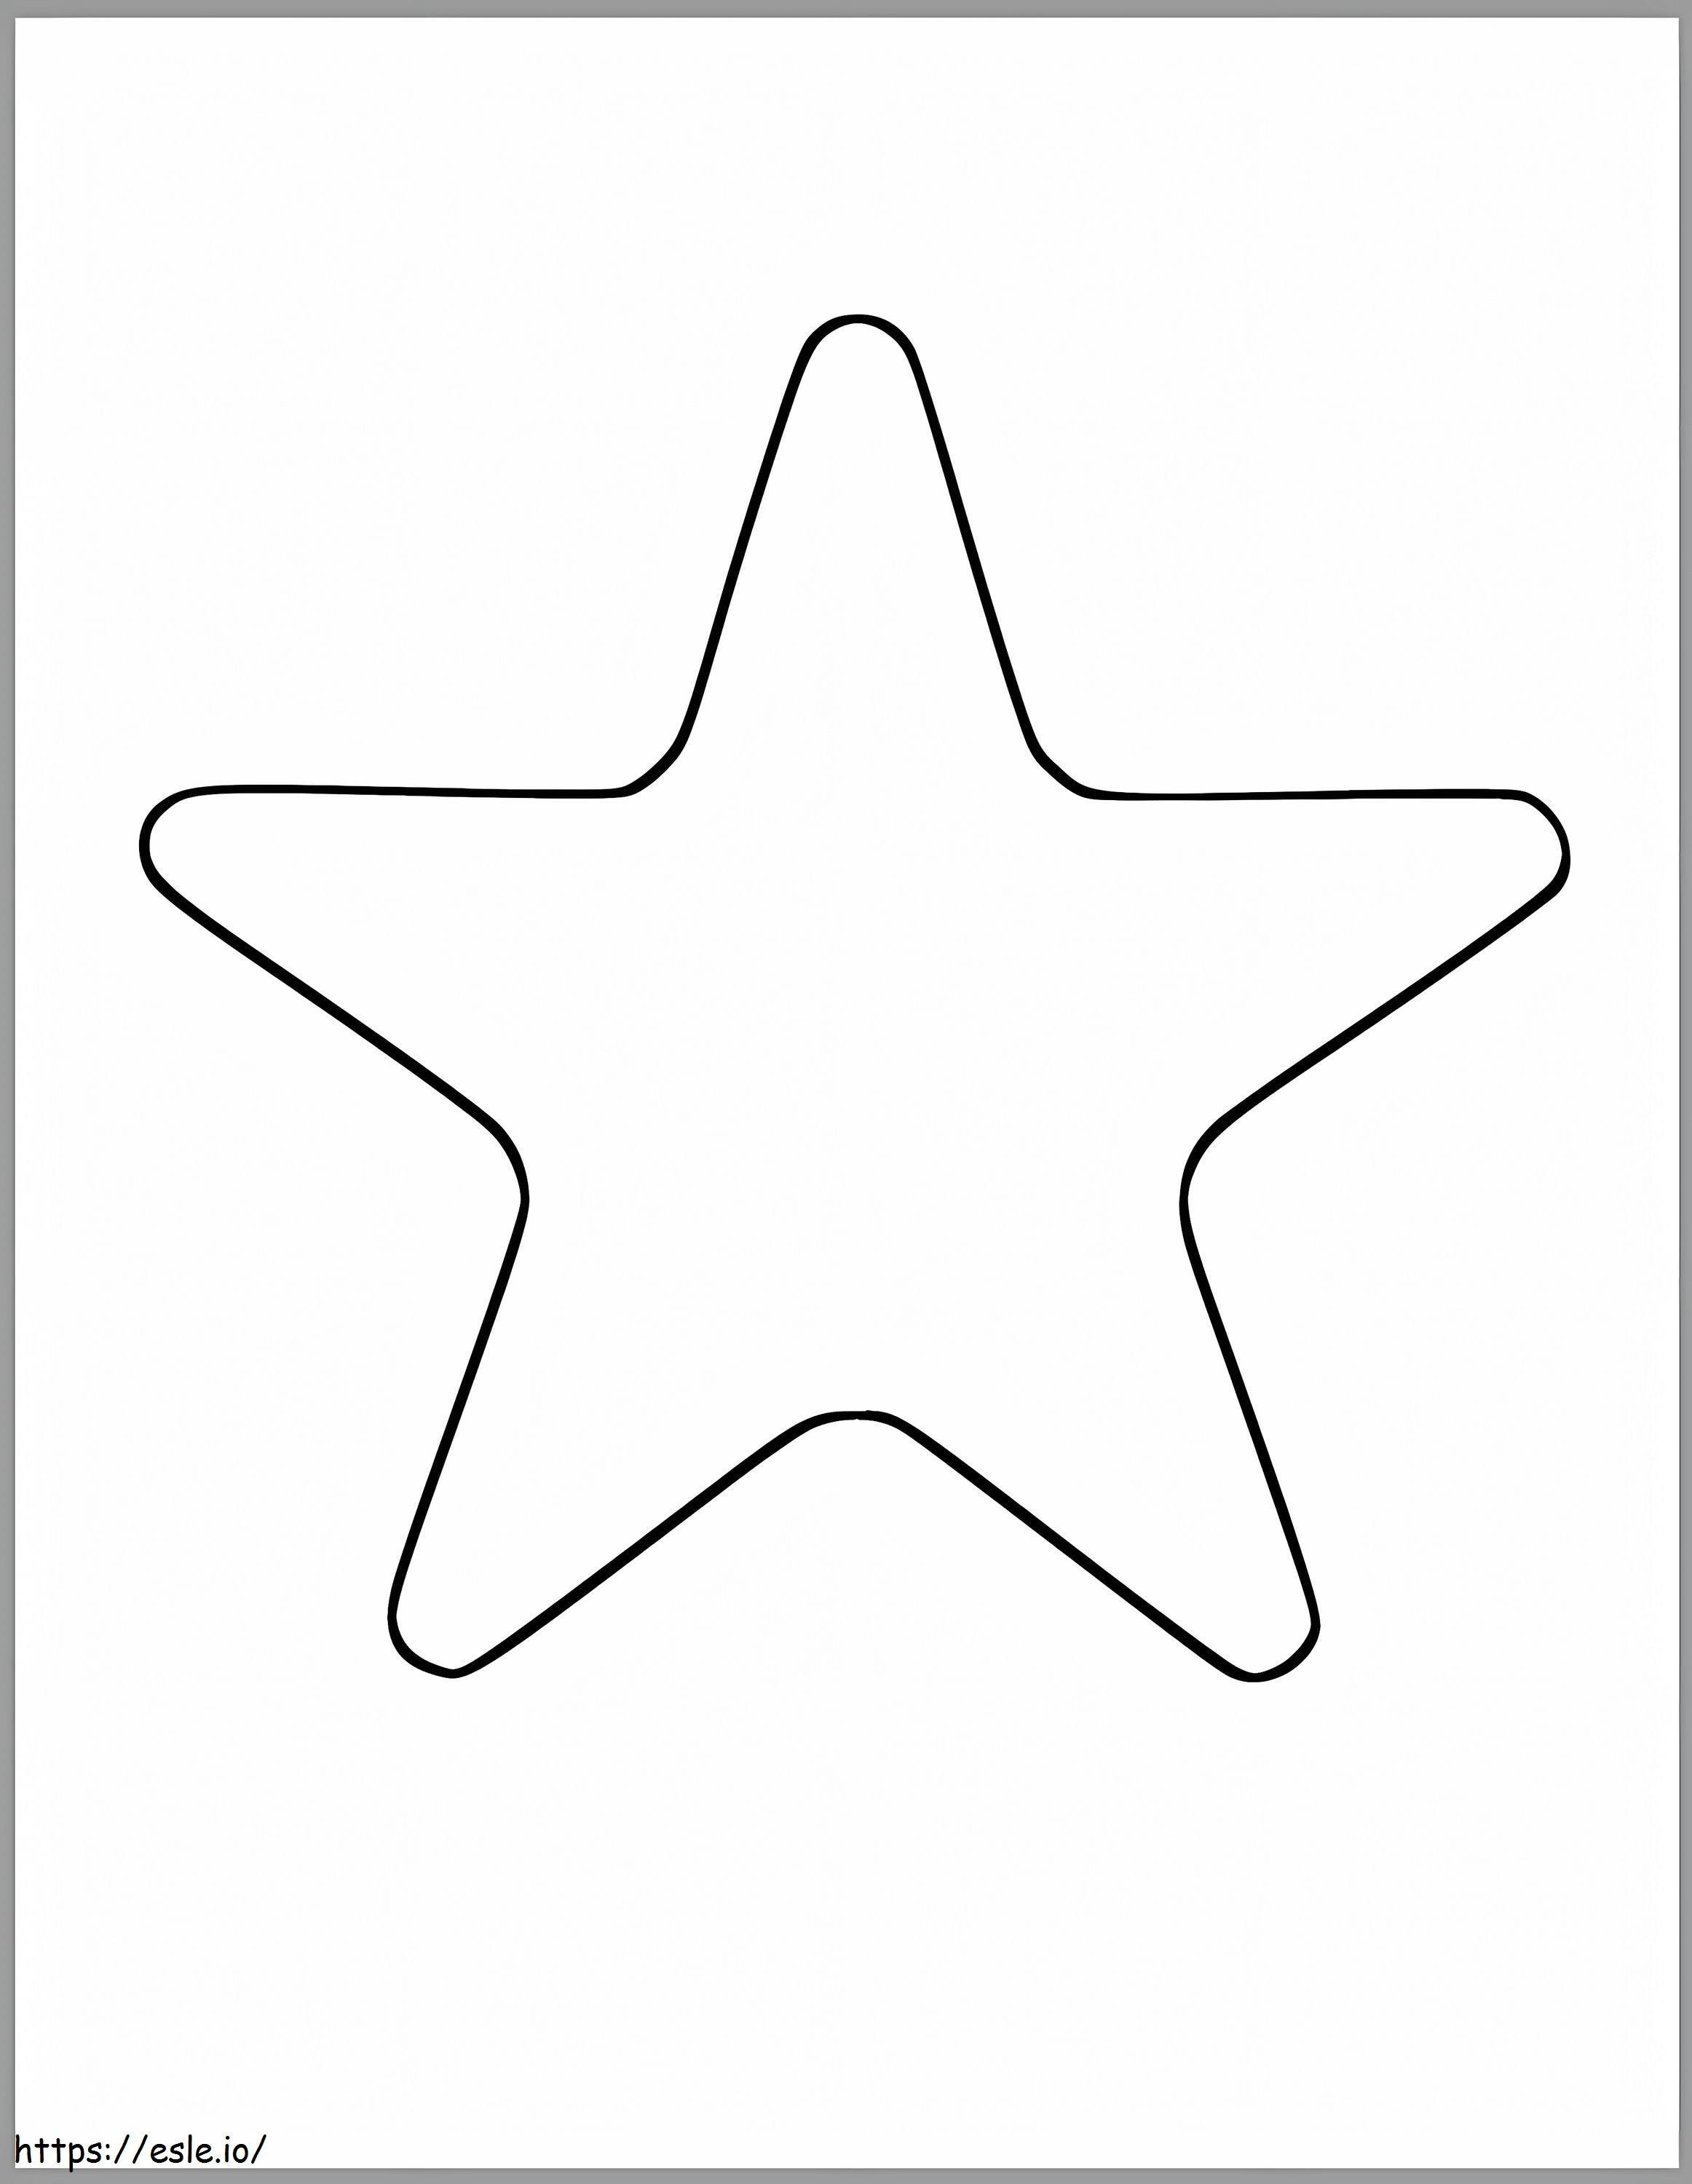 Simple Star coloring page